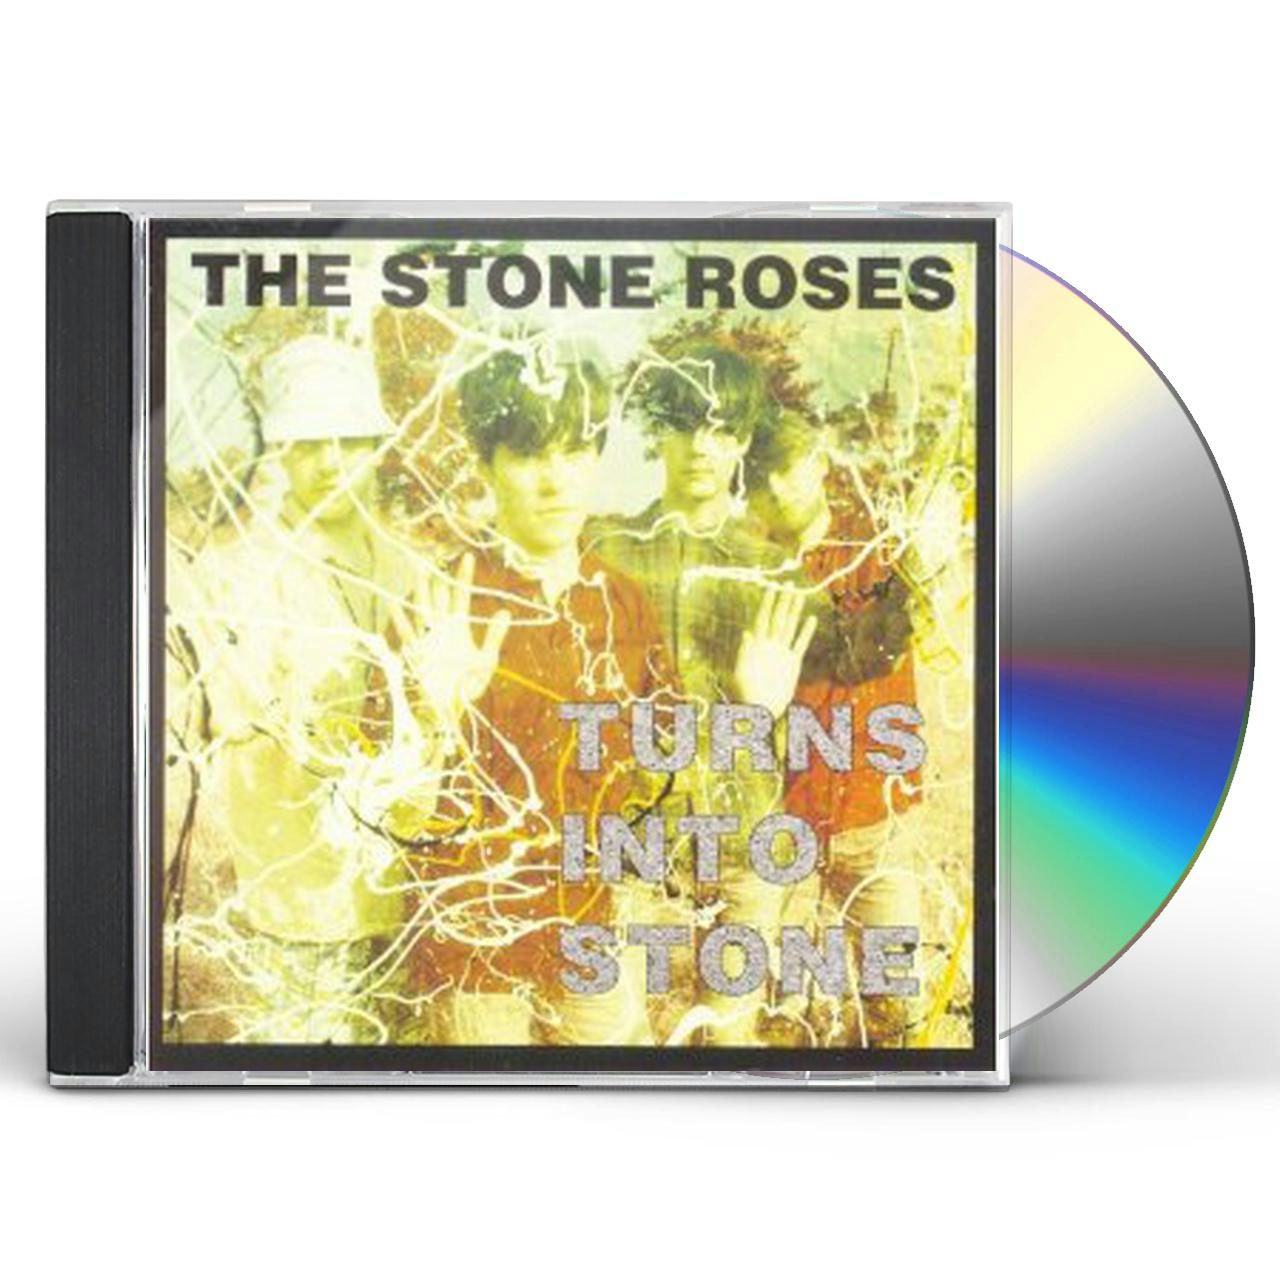 The Stone Roses TURNS INTO STONE CD